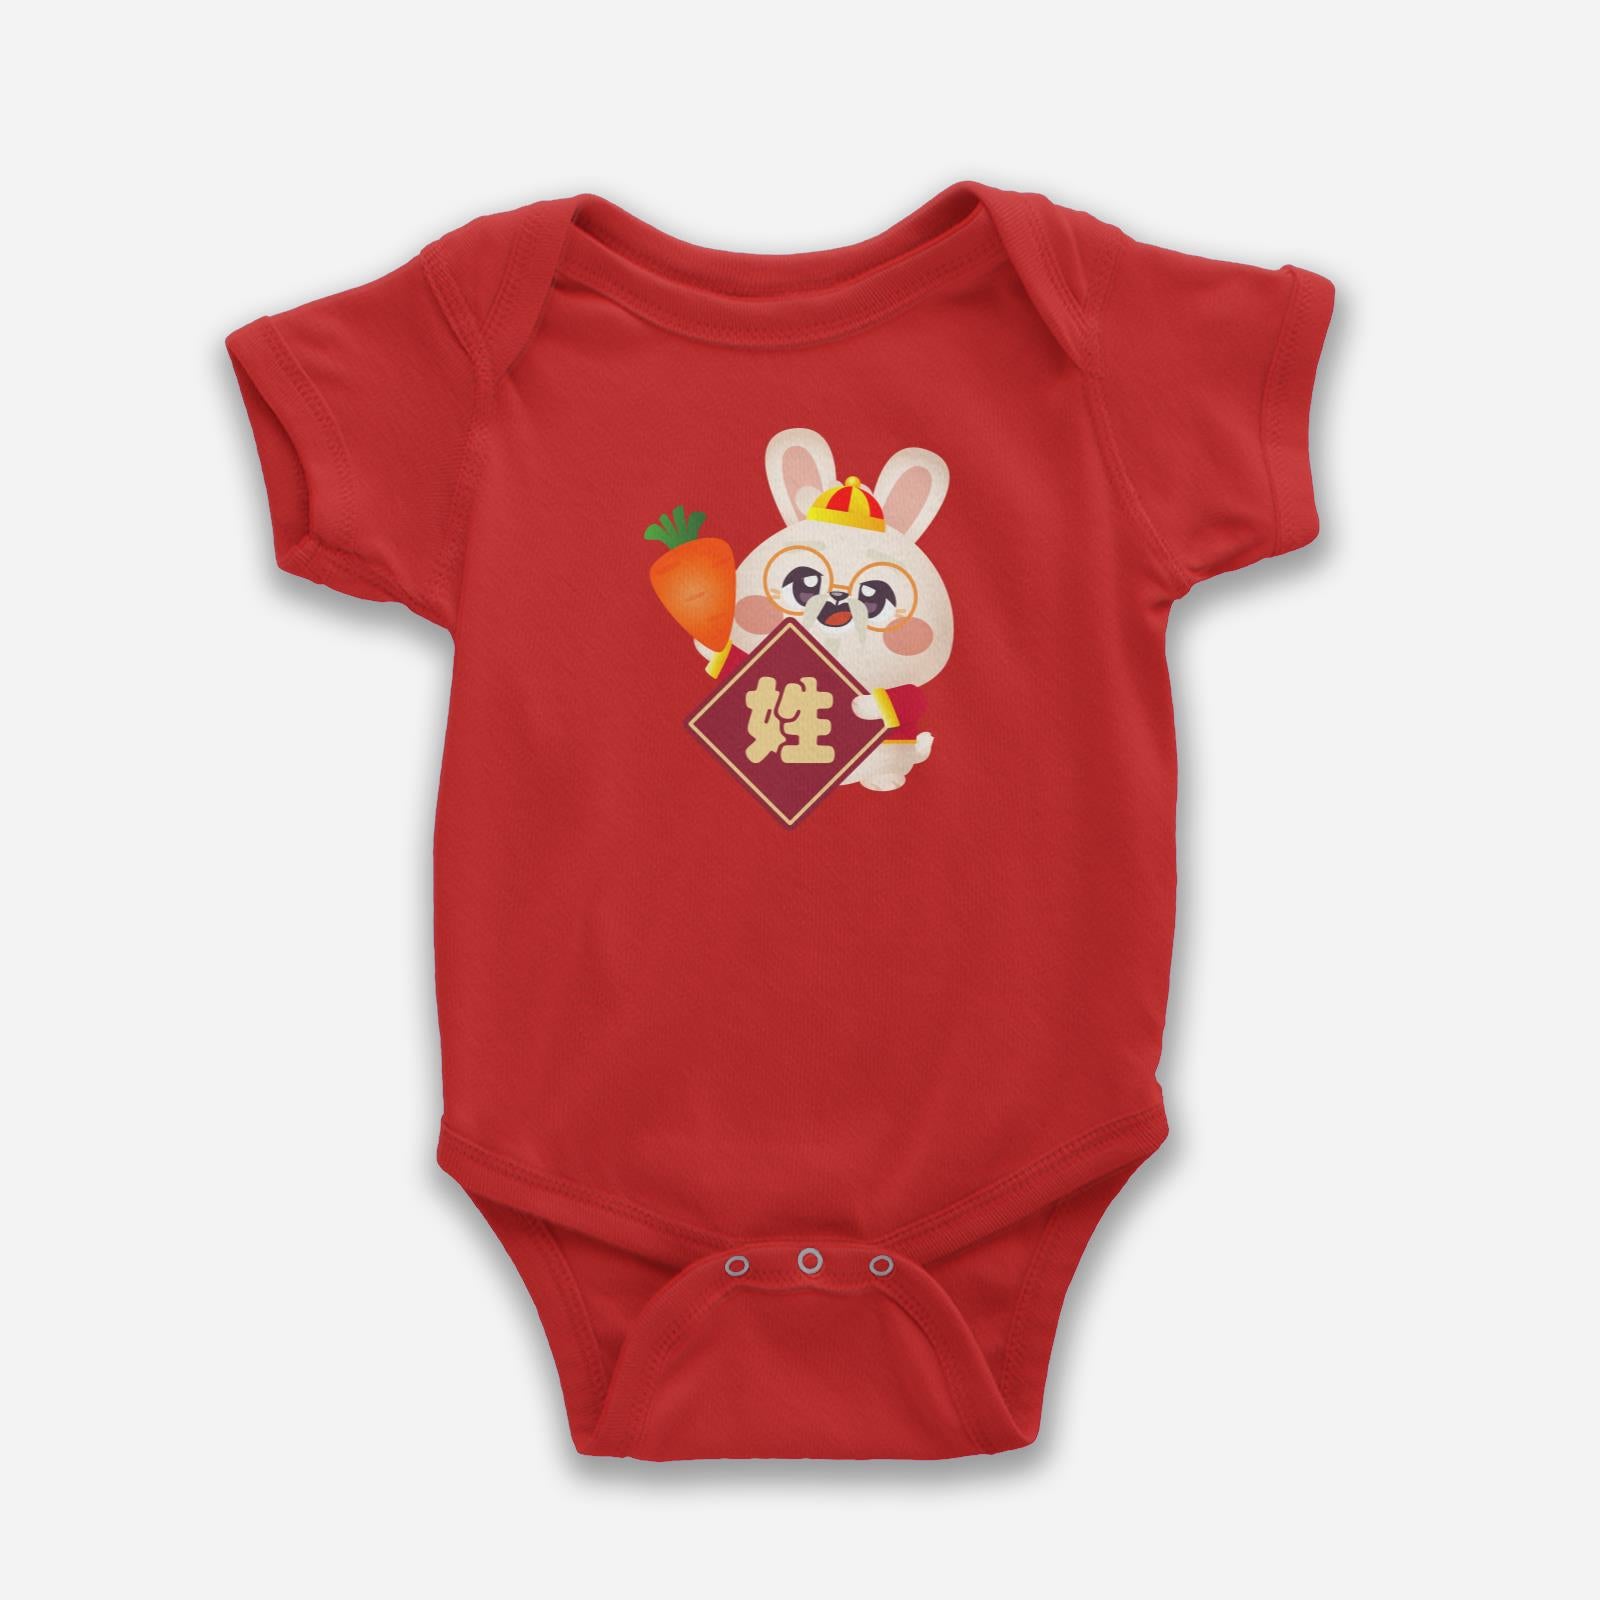 Cny Rabbit Family - Surname Grandpa Rabbit Baby Romper with Chinese Surname